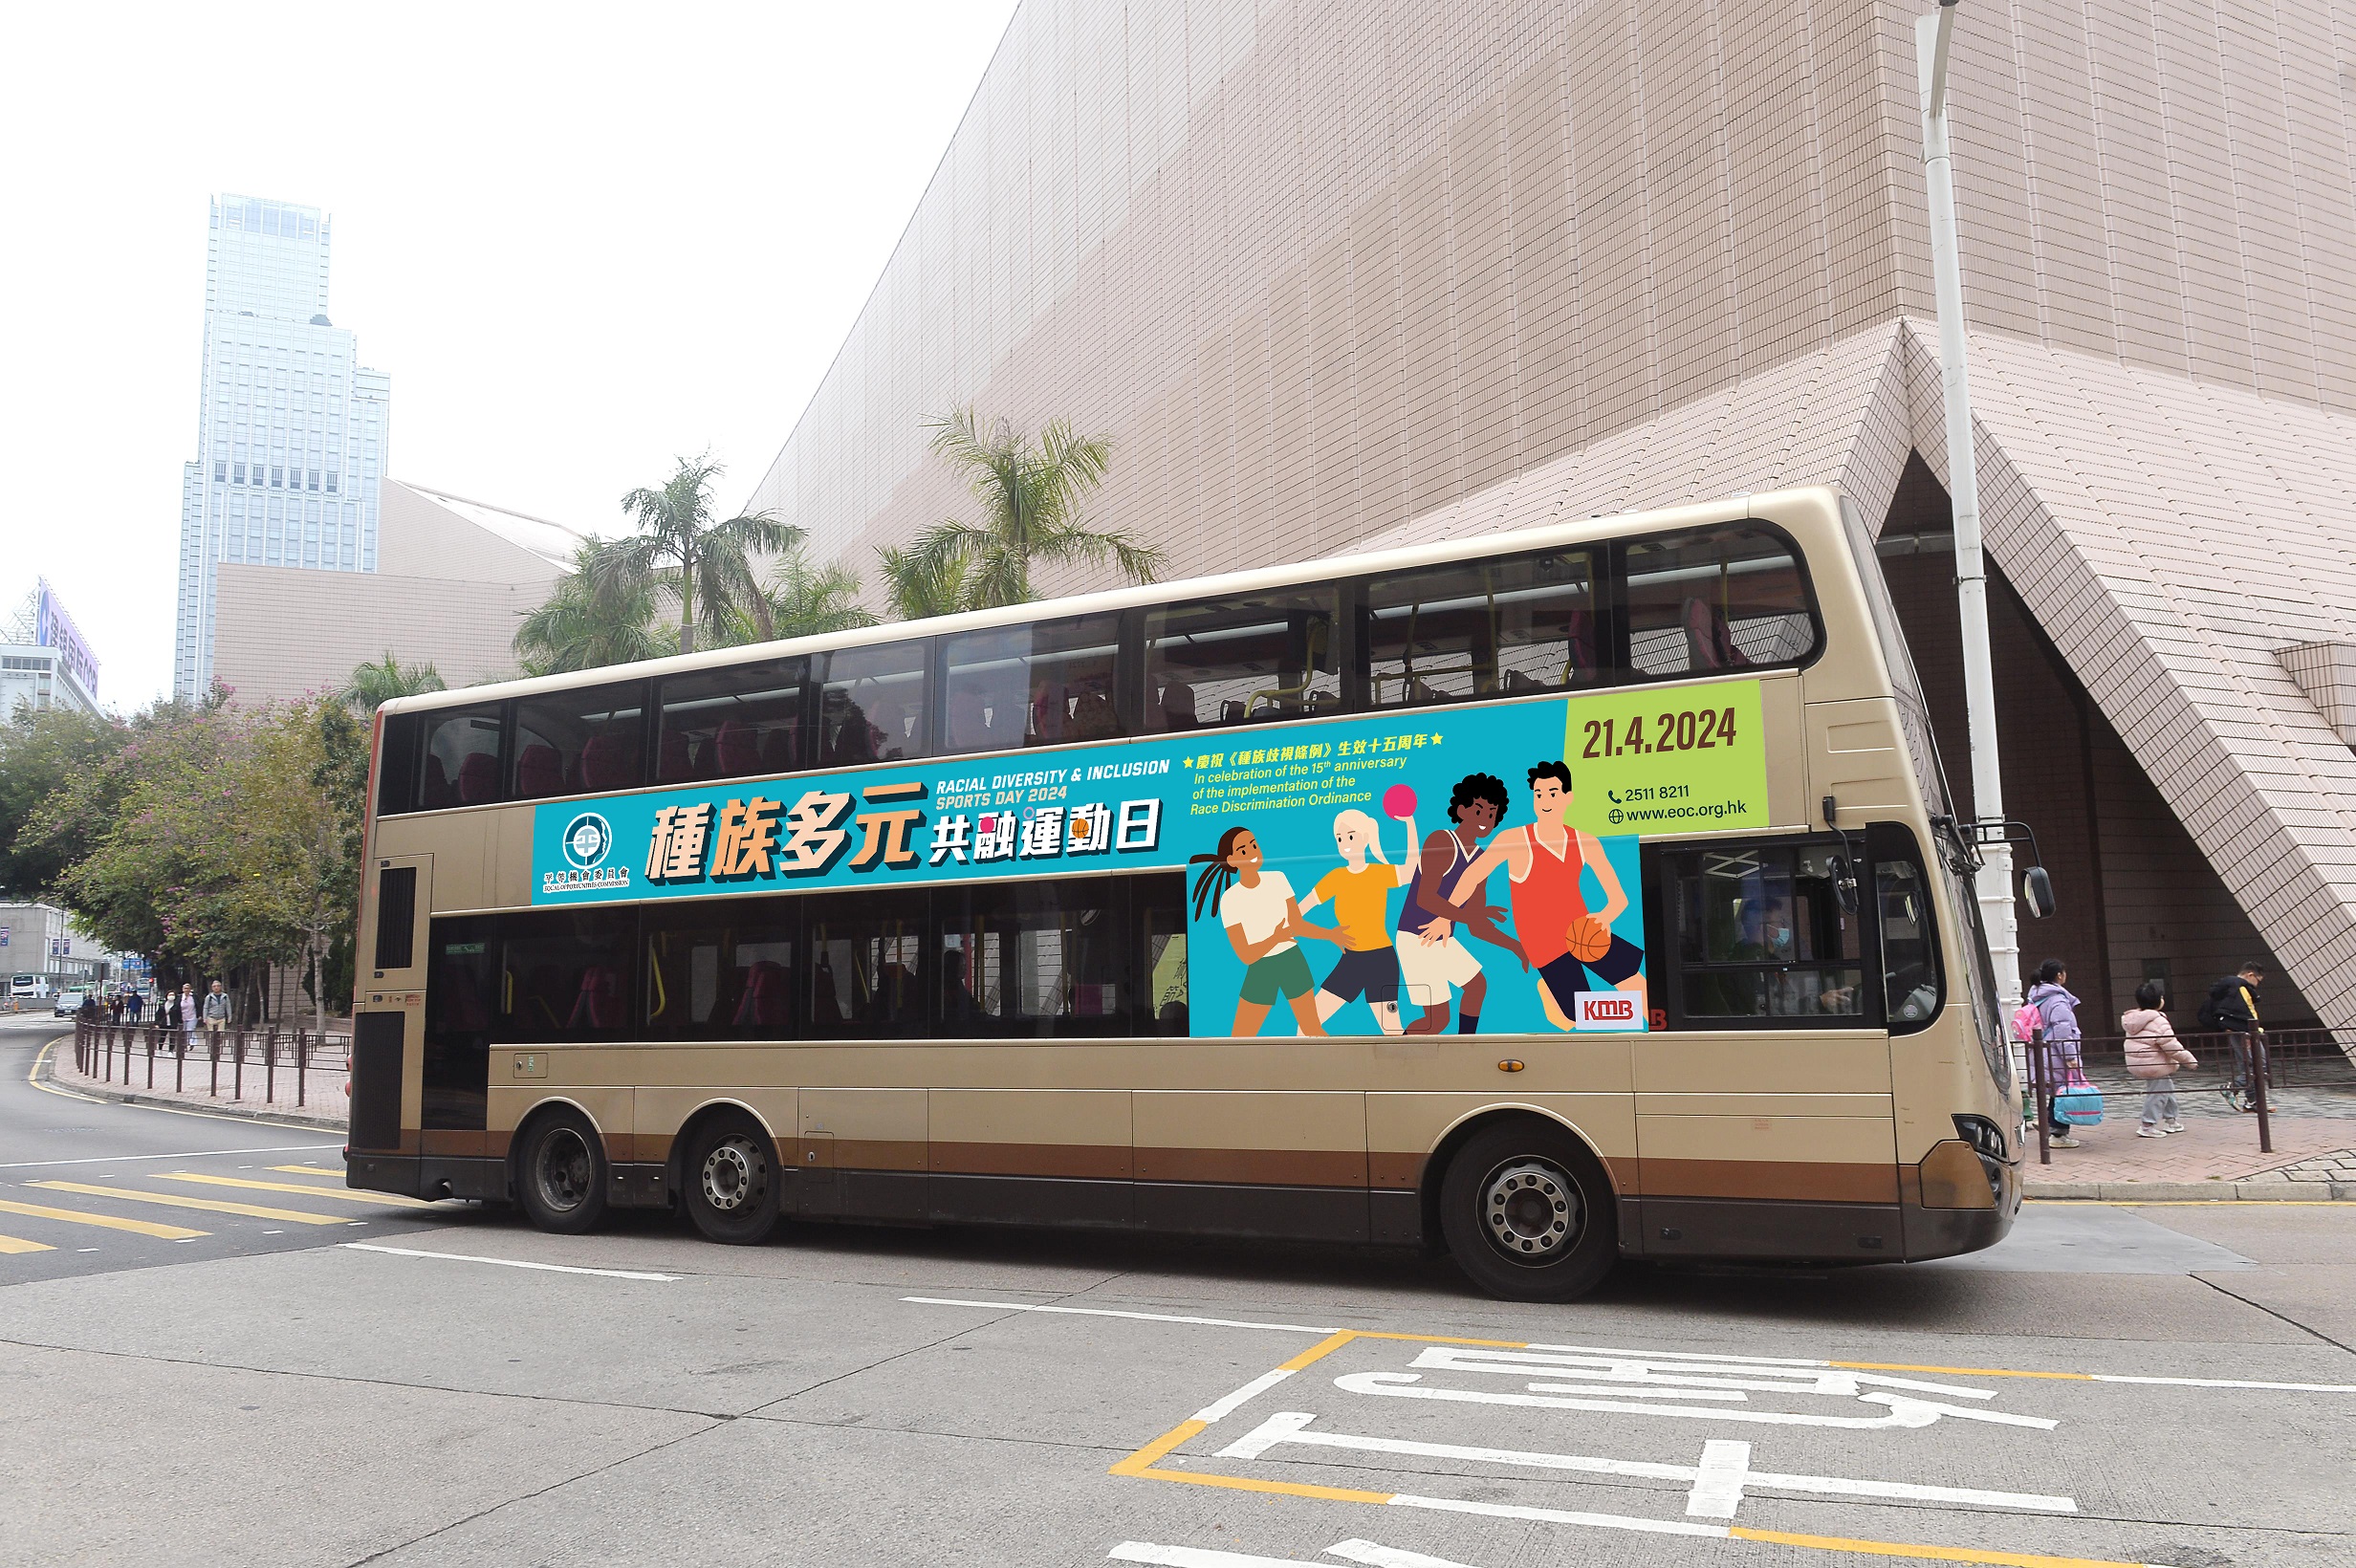 To promote racial inclusion via the power of sports, the EOC is organising Racial D&I Sports Day 2024 on 21 April 2024. A bus body advertising campaign featuring 50 buses displaying the advertisement along various routes was launched to promote the event.